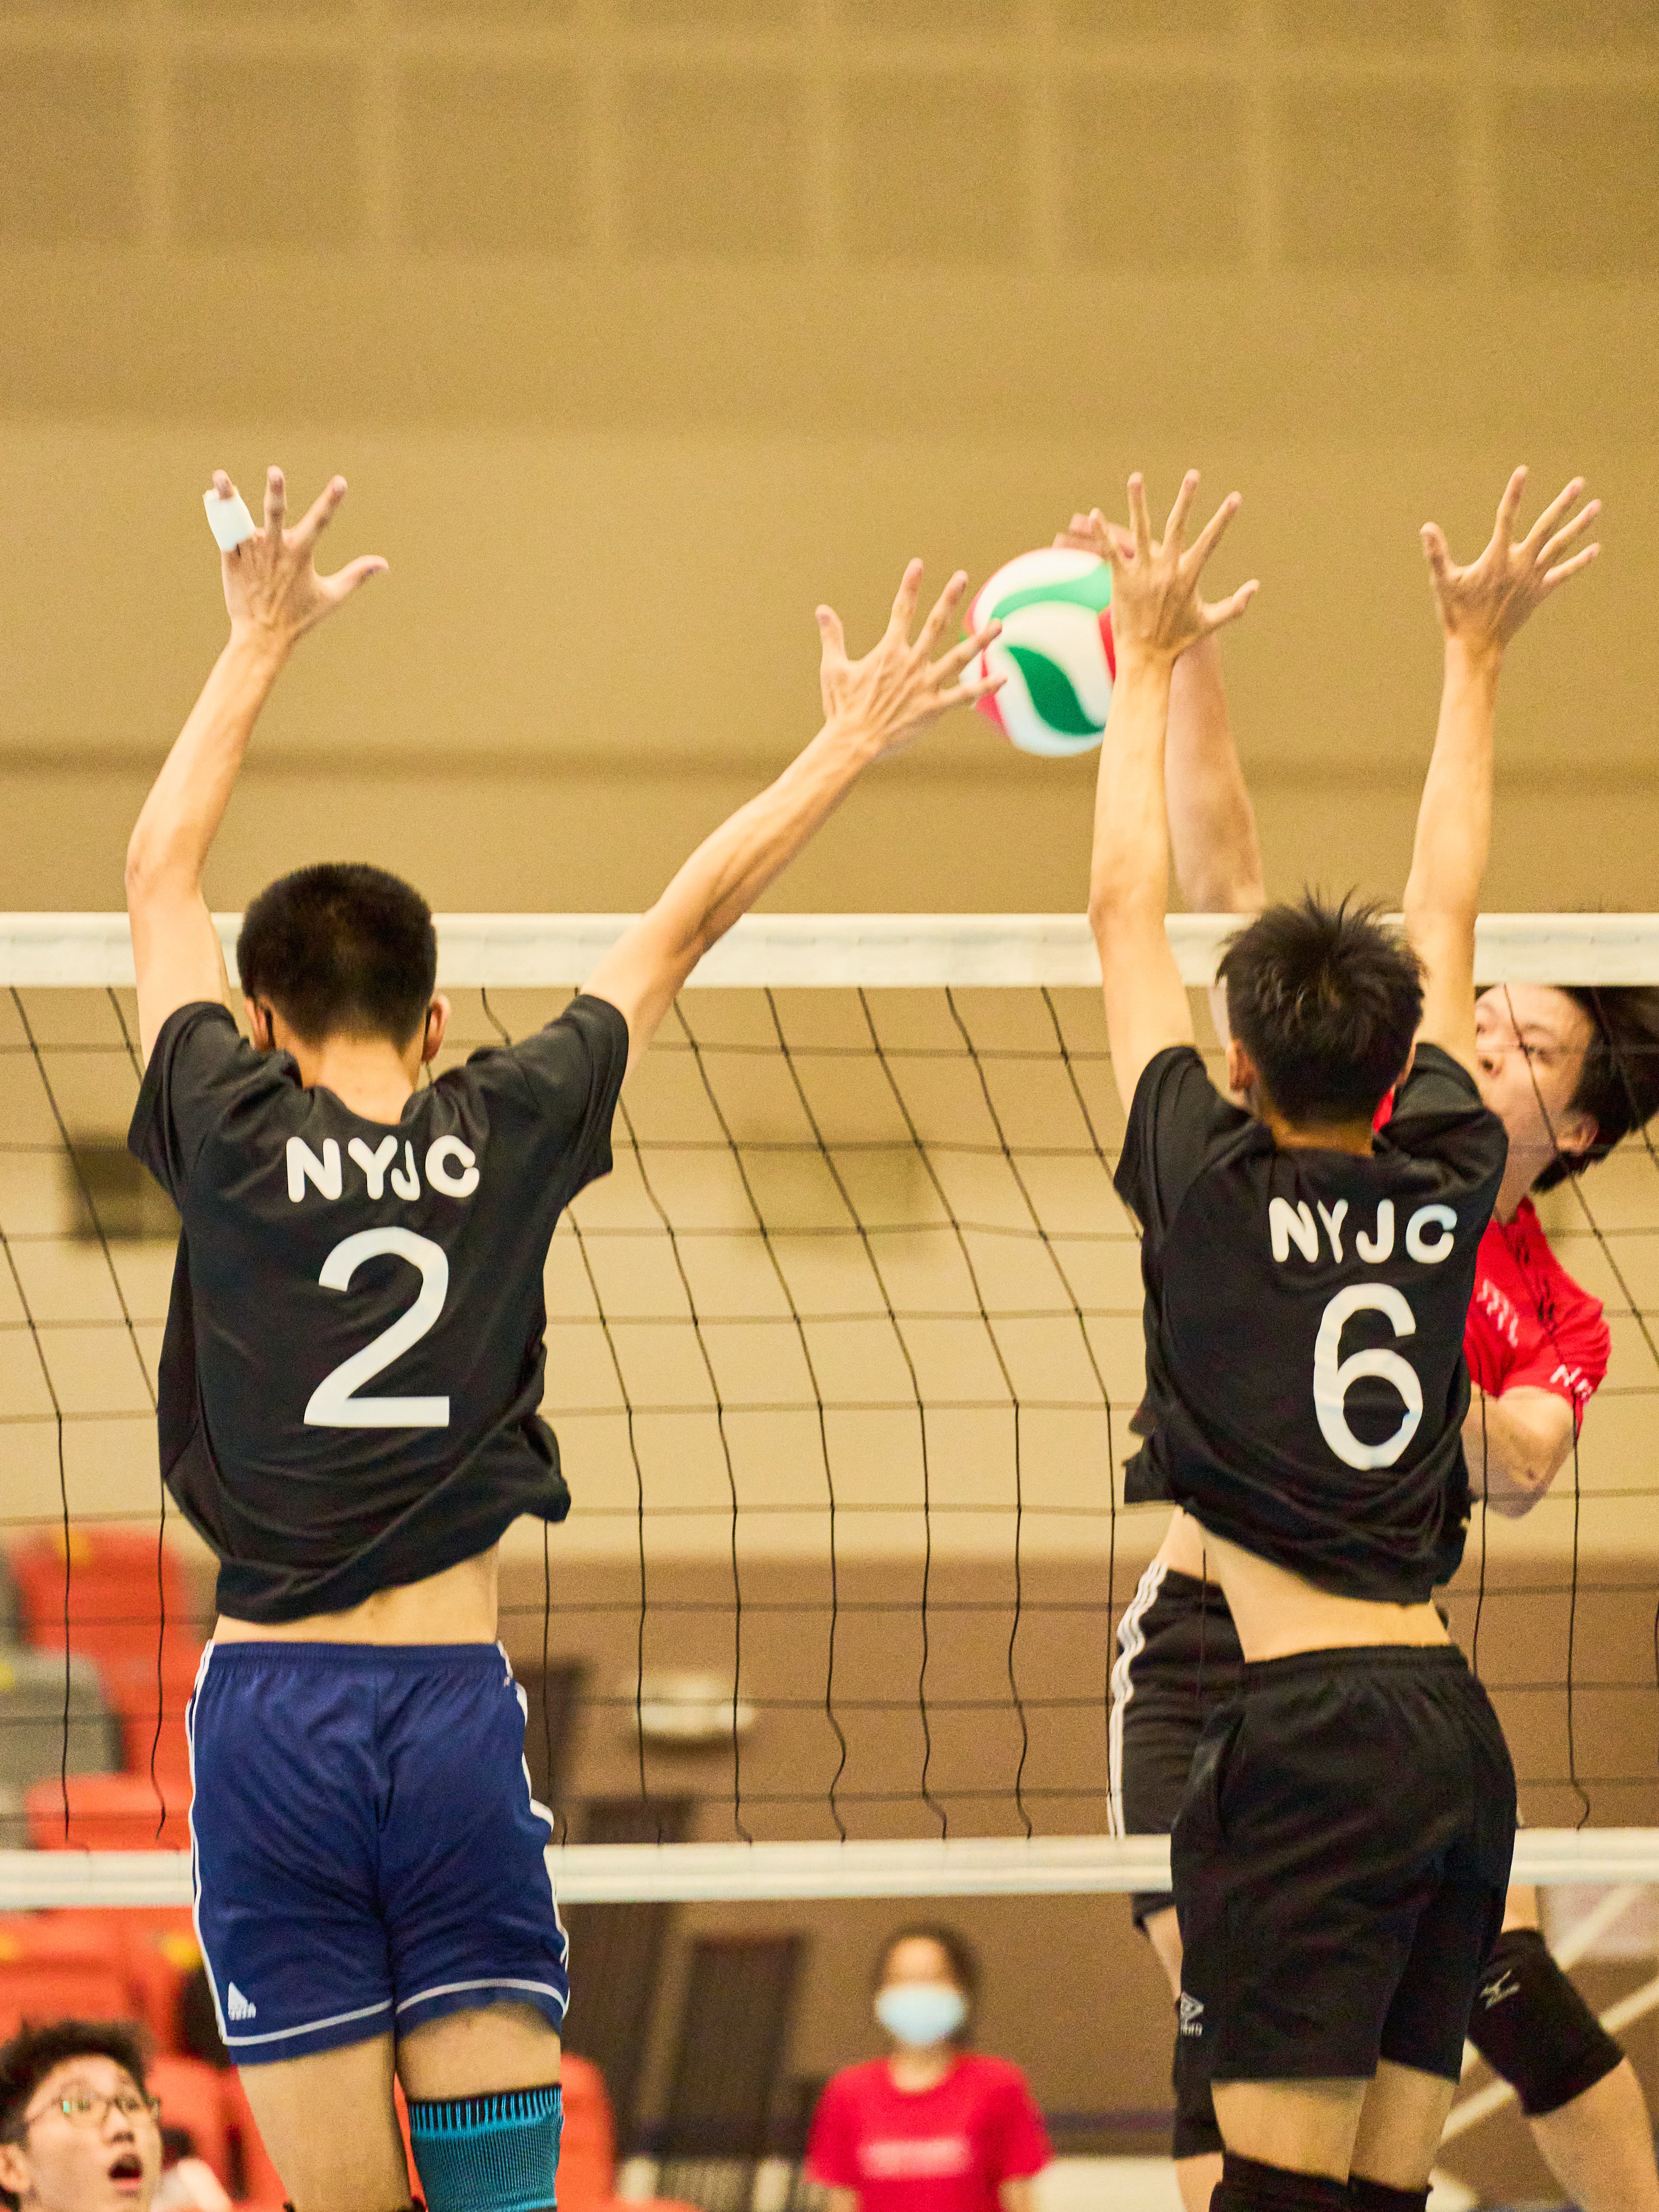 2022-05-23 09 Volleyball Final A Div Boys NYJC vs HCI, Nickcus Low(NYJC 2) and Set Wei Bin (NYJC 6) block the ball Photo by Eric Koh DSC05978